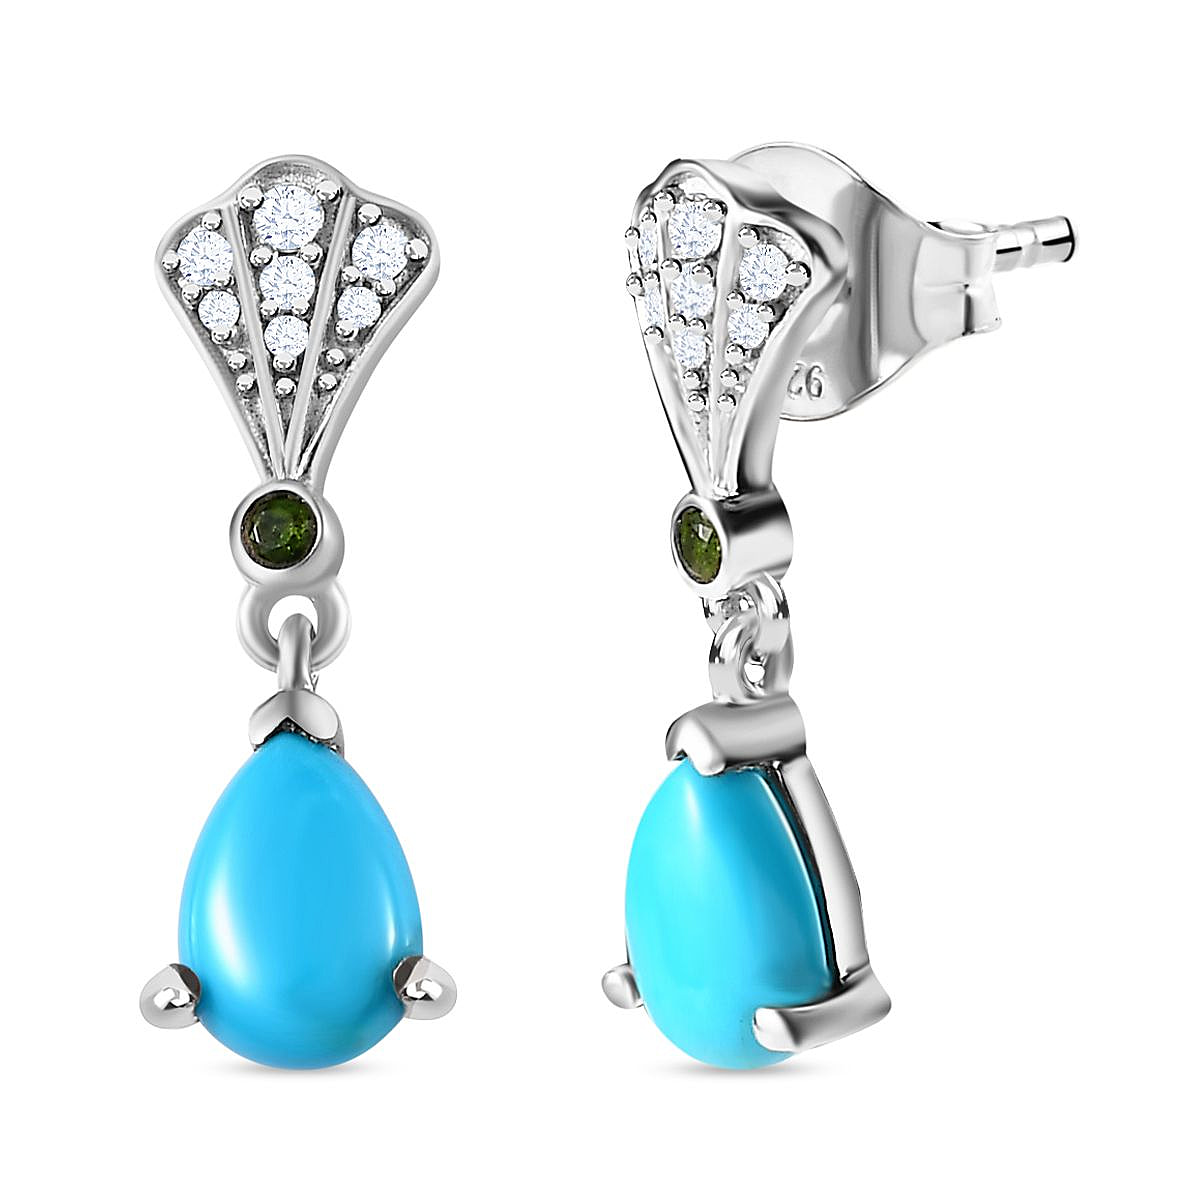 Arizona Sleeping Beauty Turquoise, Natural Chrome Diopside & Natural Zircon Earrings in Platinum Overlay Sterling Silver 1.38 Ct.